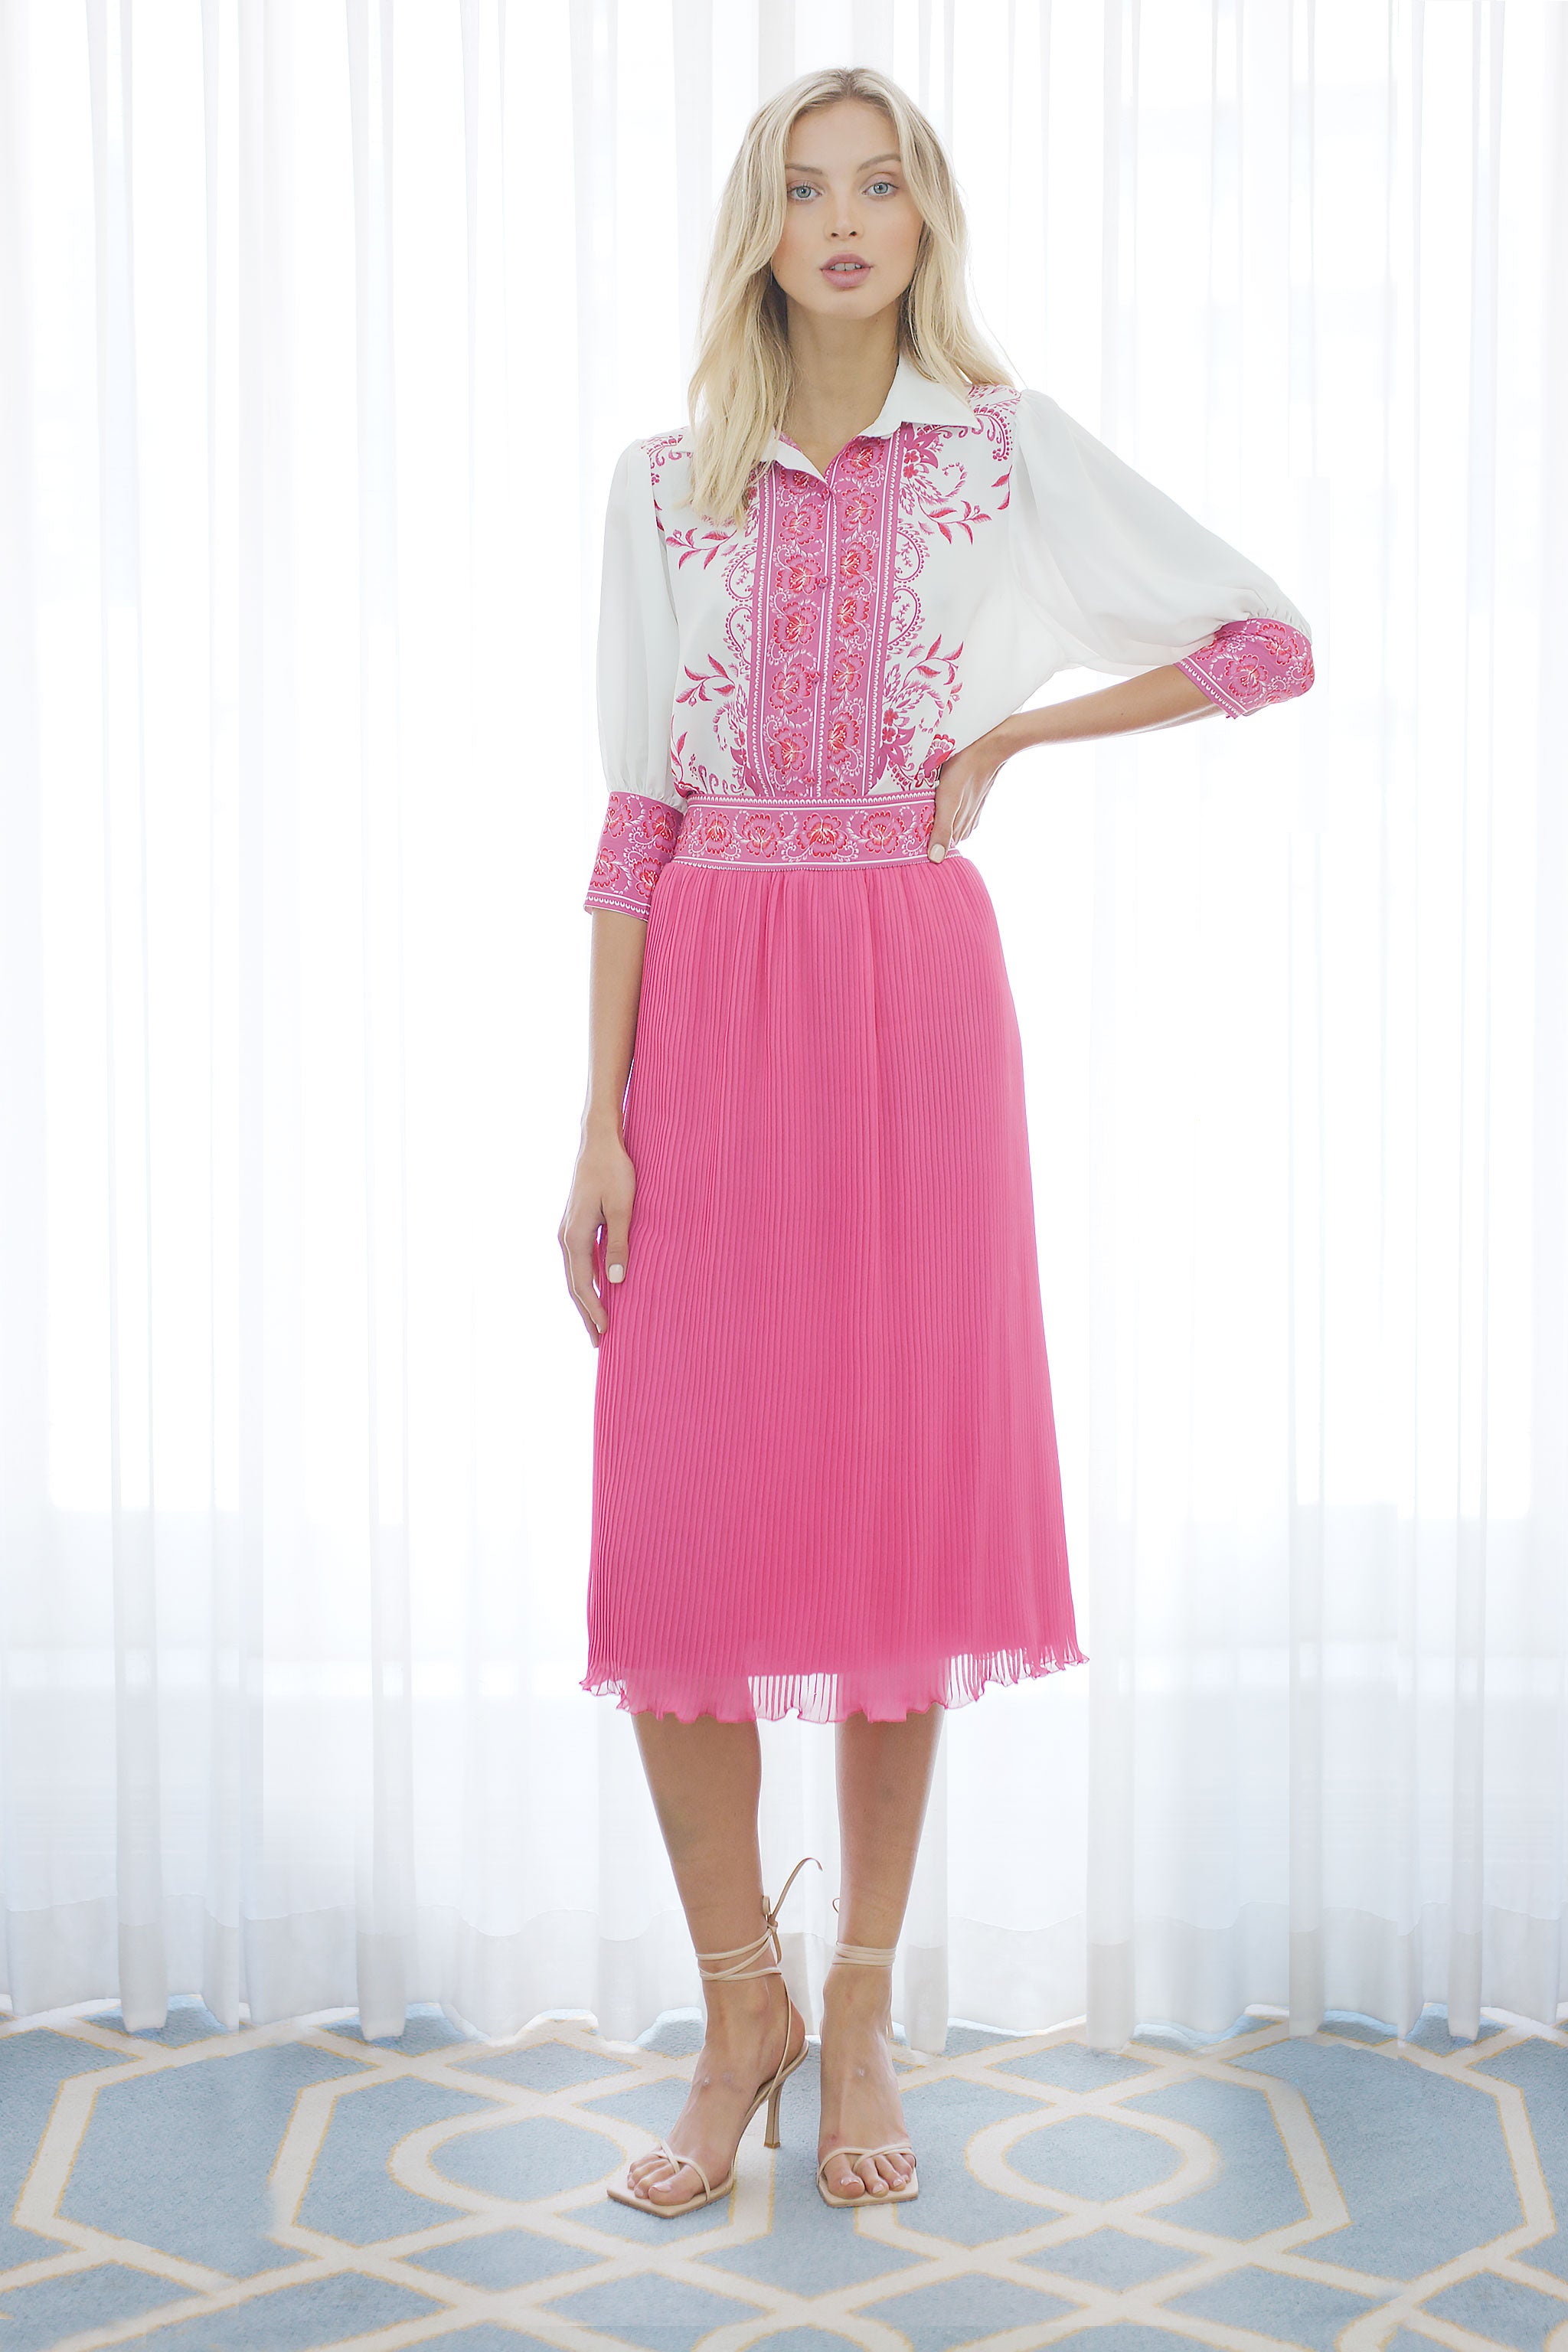 The Lover Pleated Skirt in Fuchsia